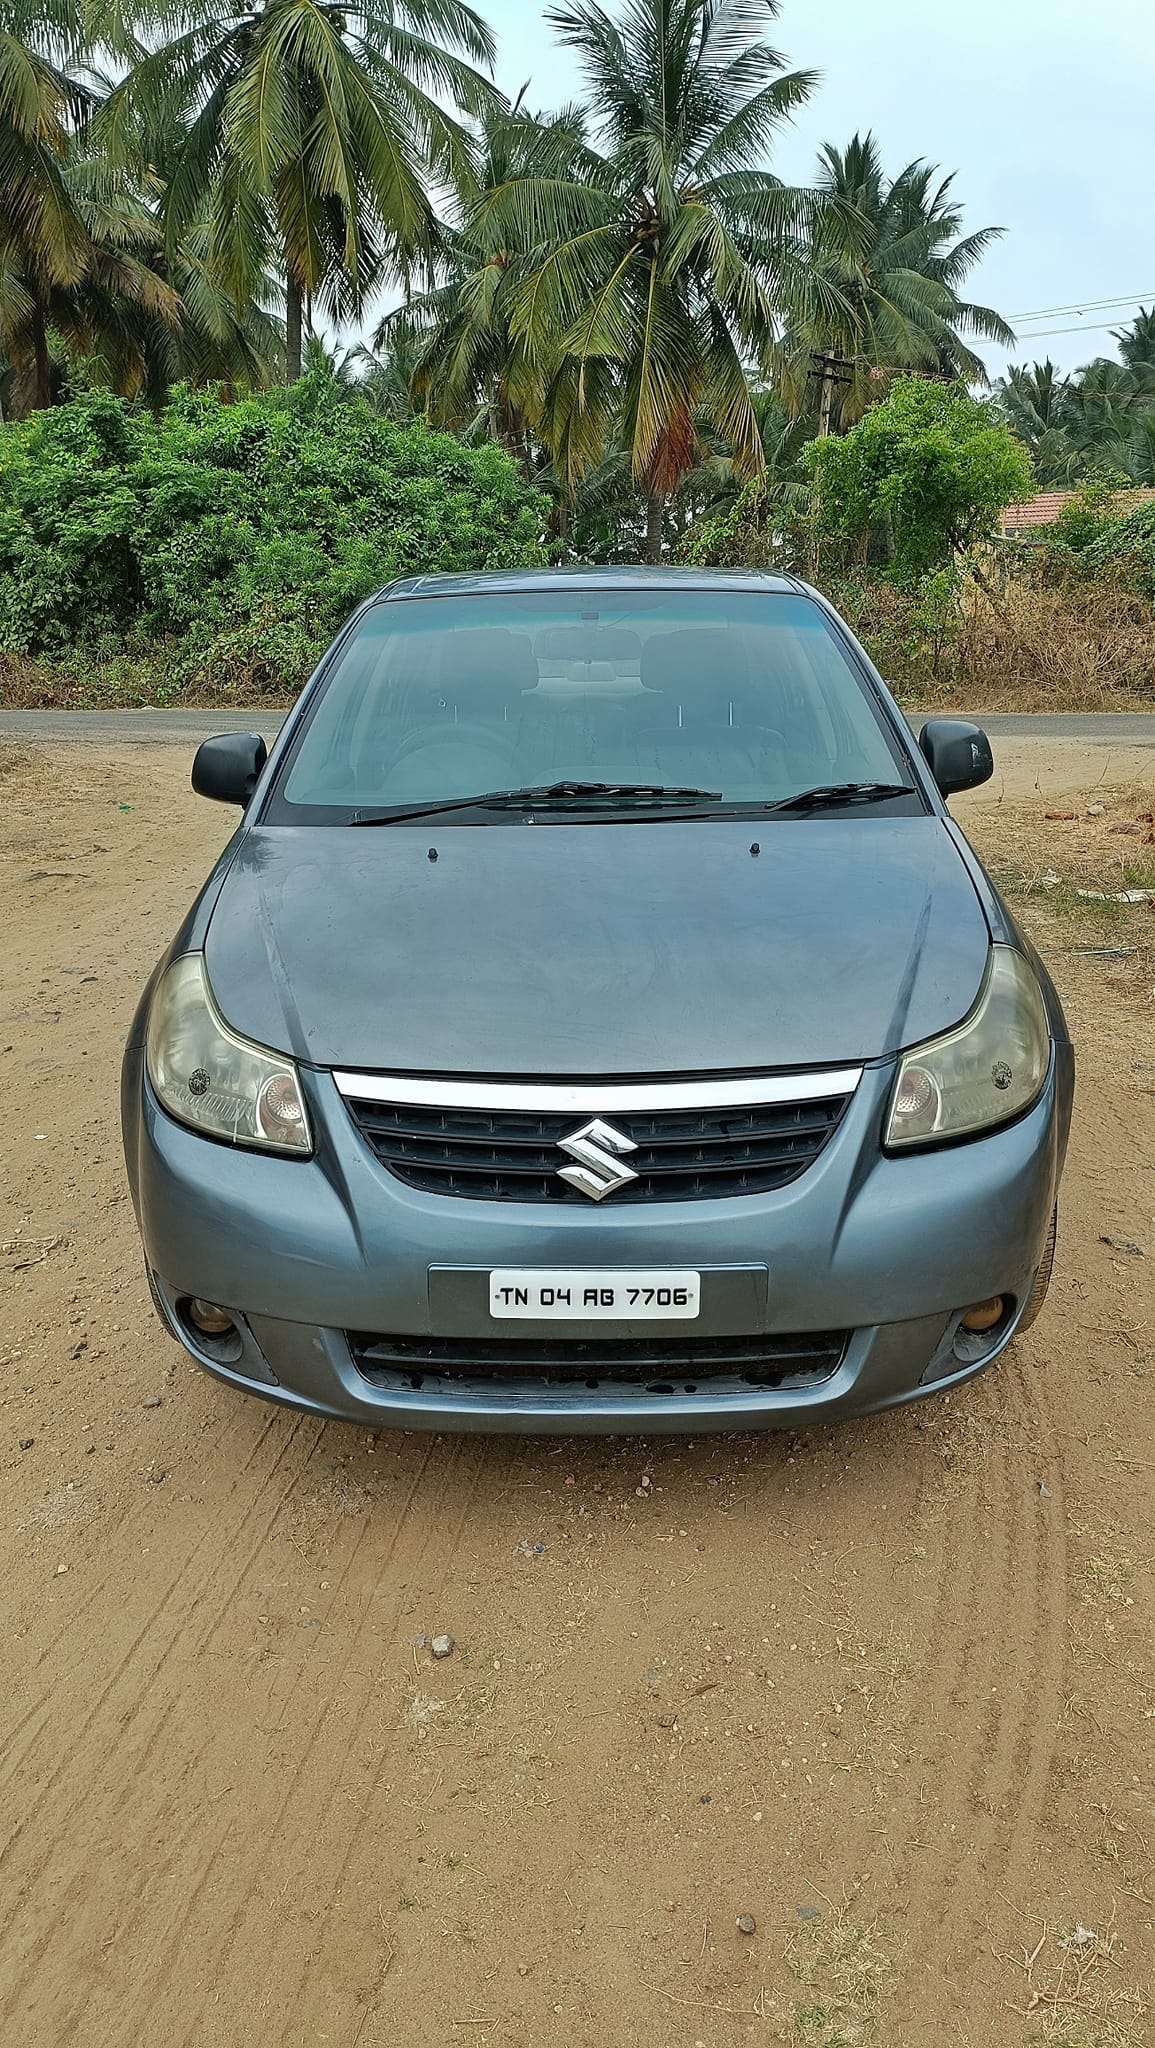 3112-for-sale-Maruthi-Suzuki-SX4-Petrol-First-Owner-2008-TN-registered-rs-195000